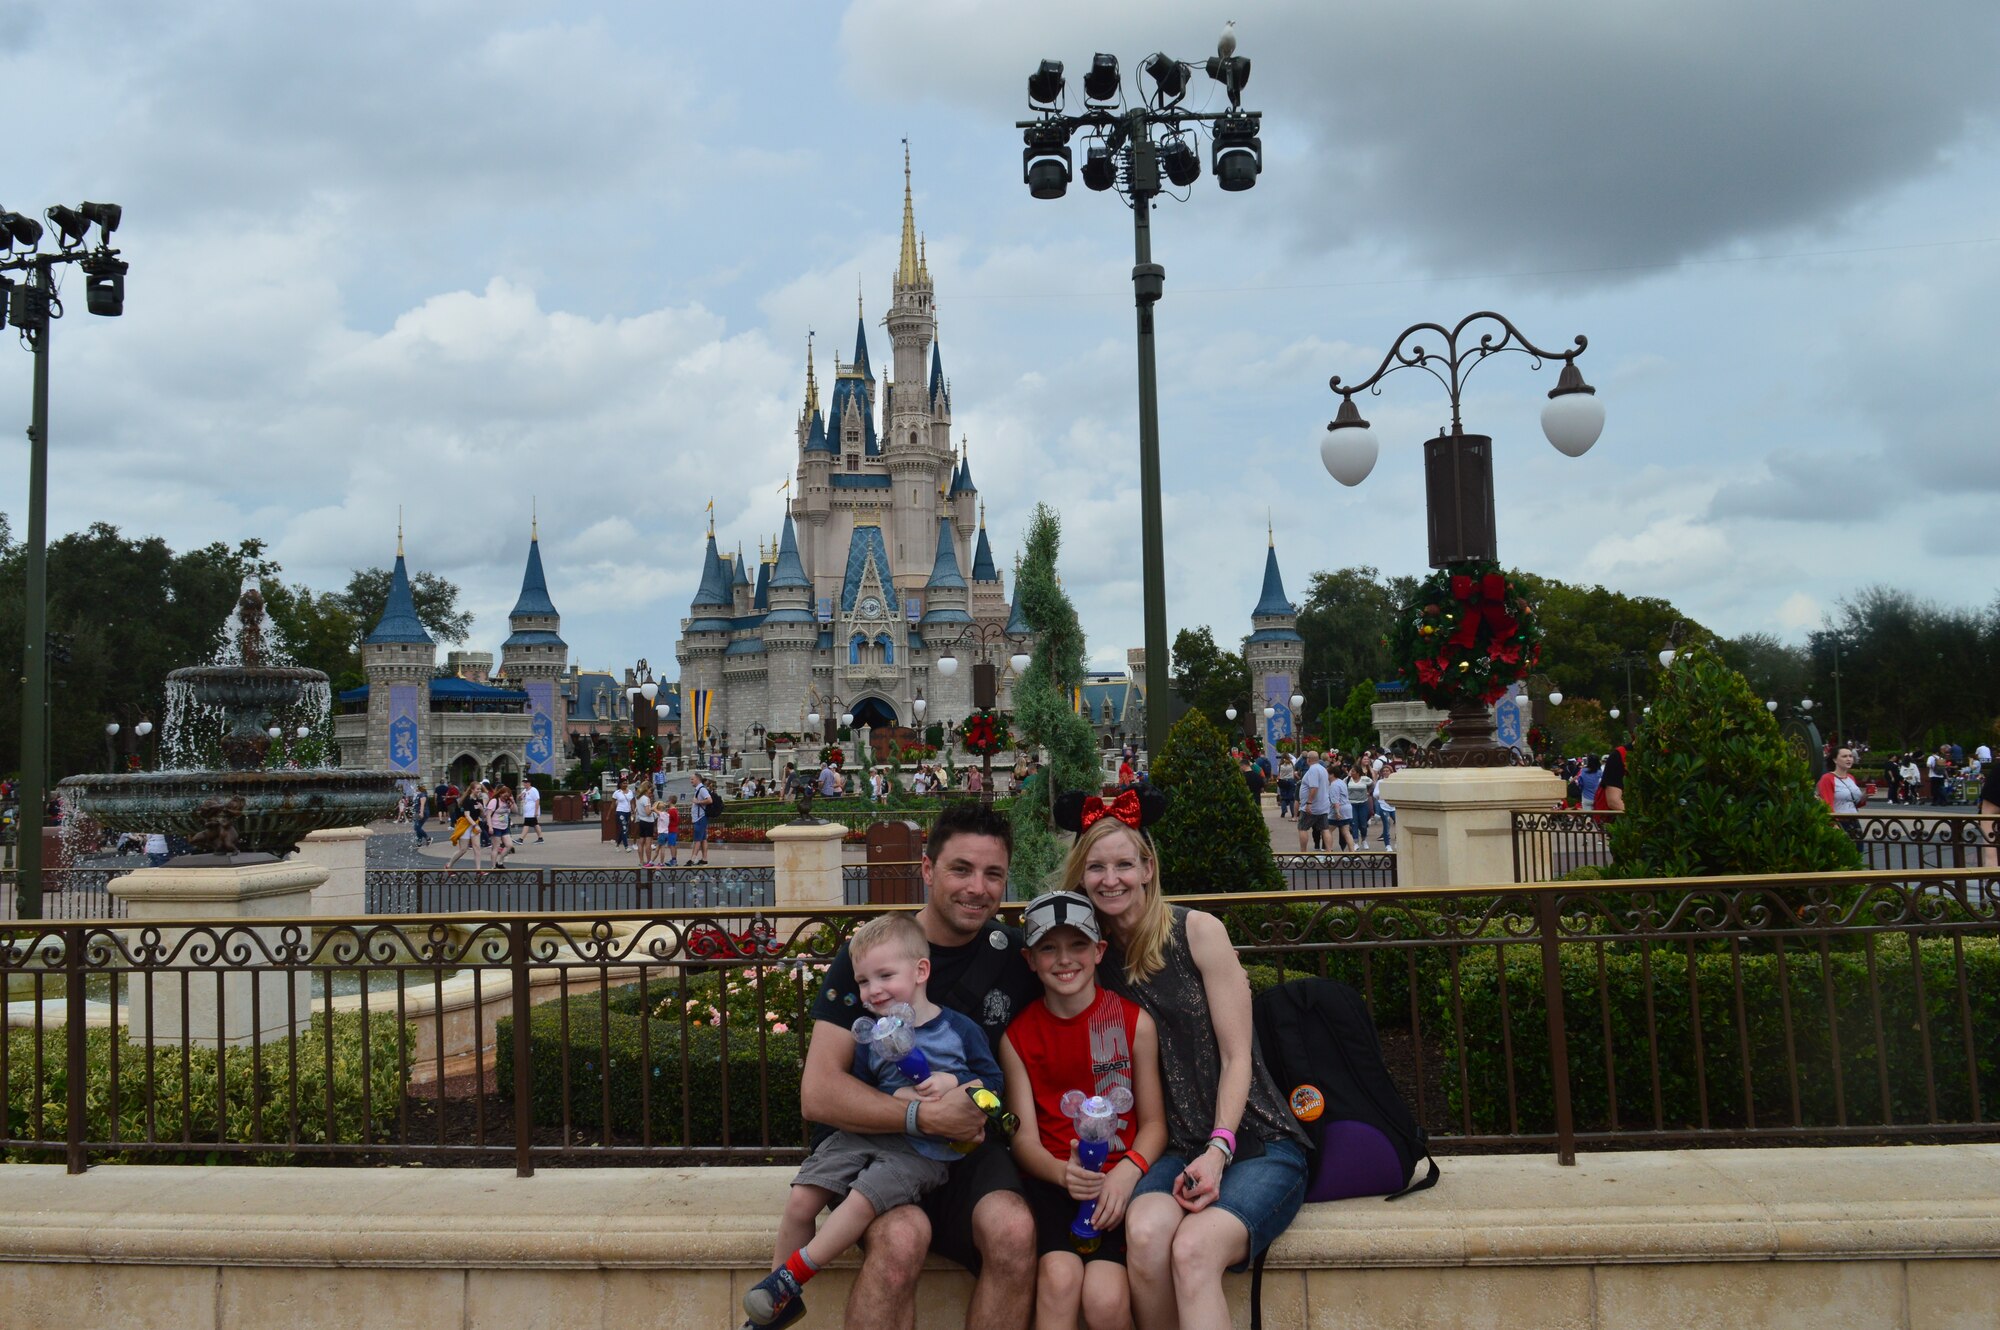 Canadian Armed Forces Capt. Patrick Rodrigue, his wife, Wendy, and their family experienced one of their life-long dreams of visiting Disney World thanks to their pre-departure preparations, which he said is key to lowering stress and helping with integration into a new culture.